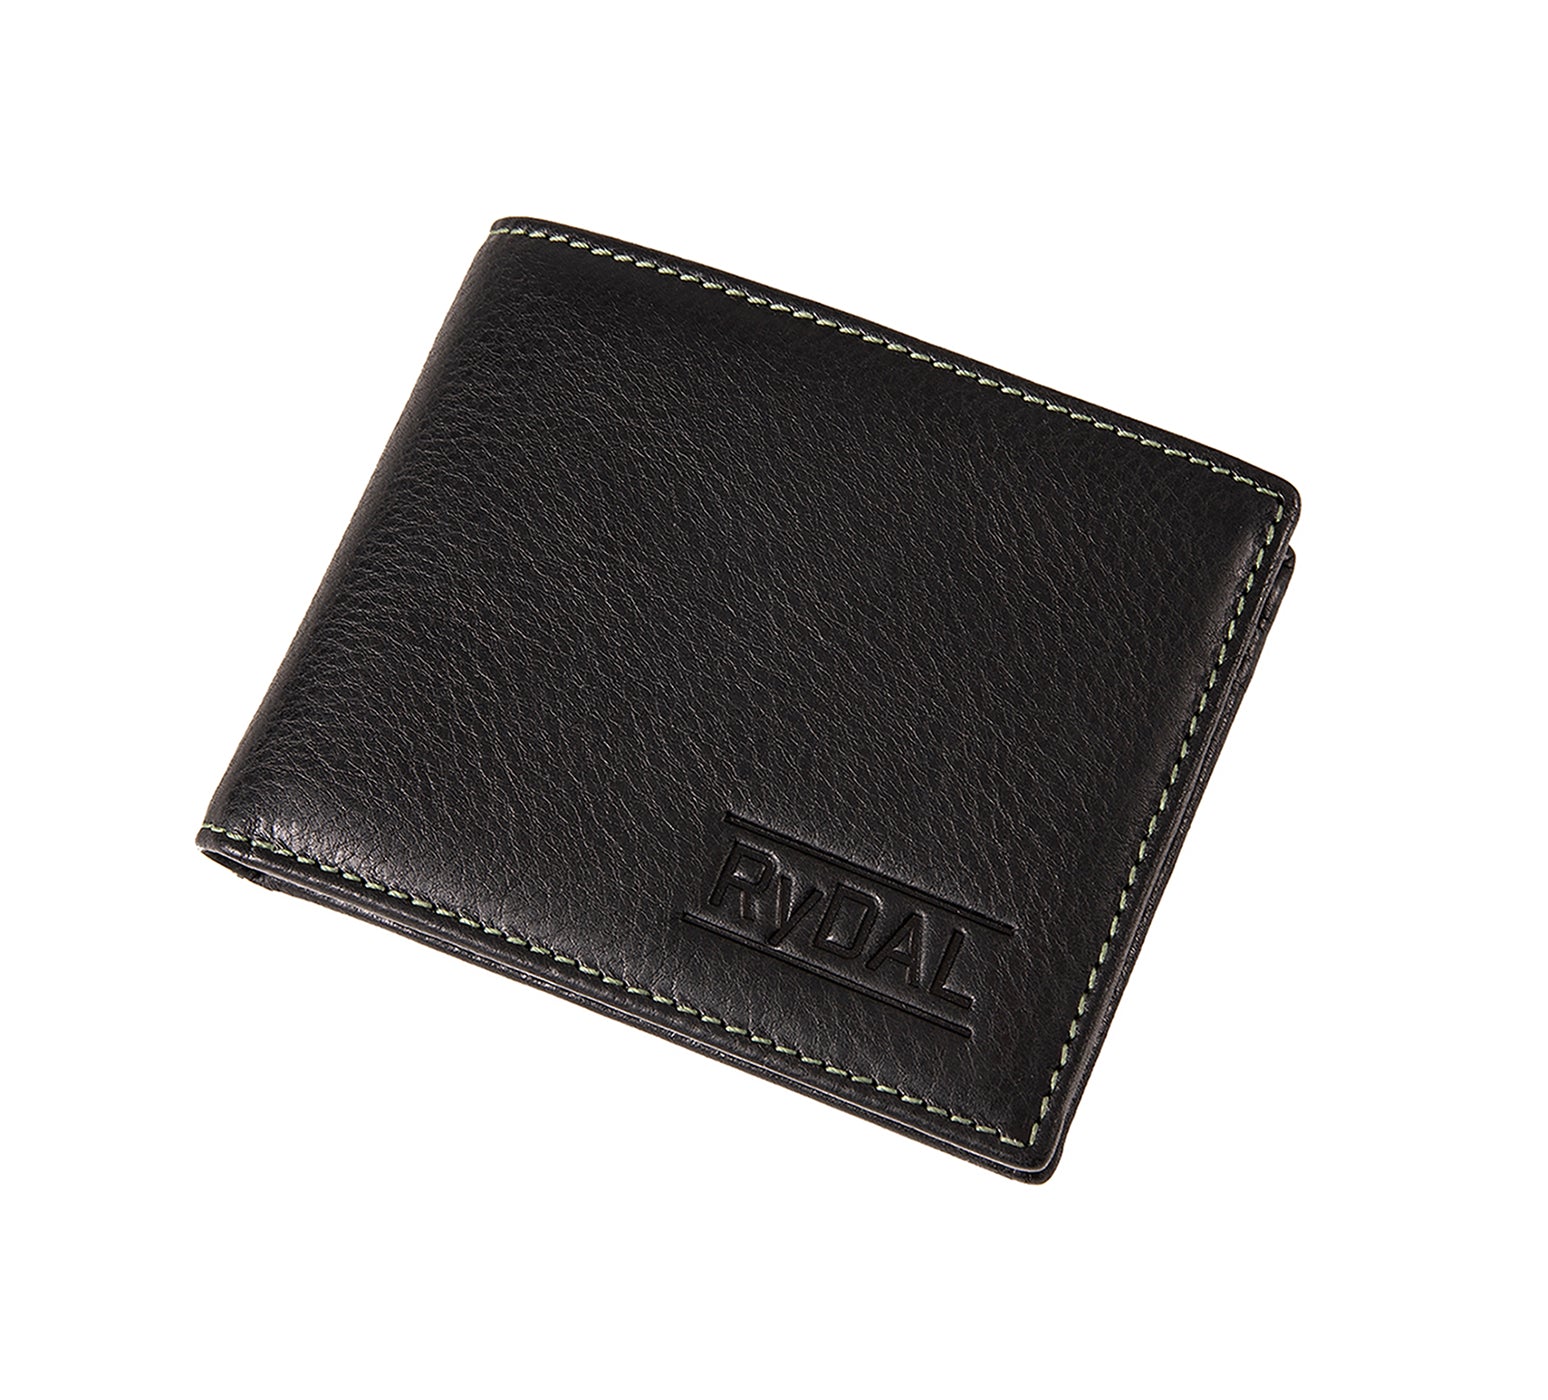 Mens Leather Wallet with Coin Pocket from Rydal in 'Black/Green' showing wallet closed.